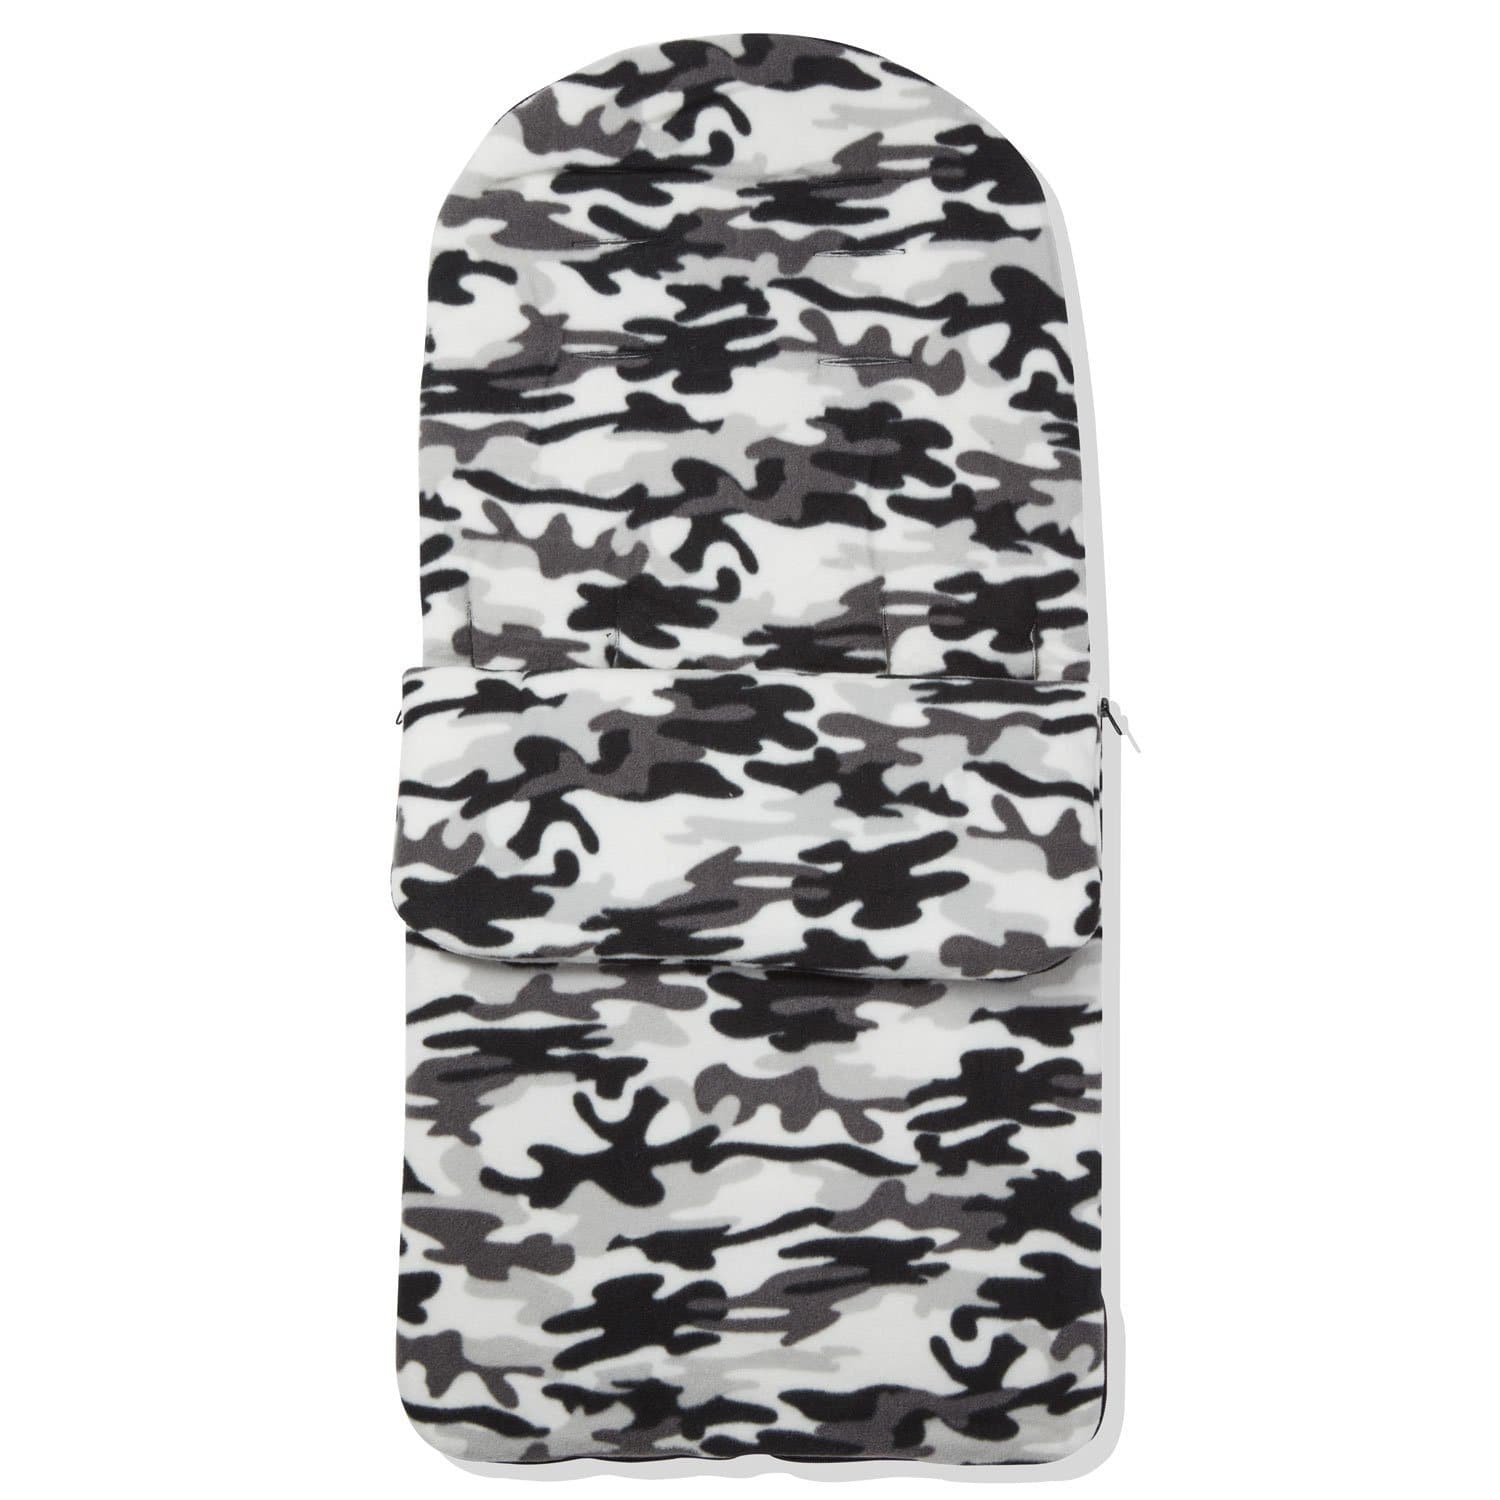 Fleece Footmuff / Cosy Toes Compatible with Kiddicouture - Grey Camouflage / Fits All Models | For Your Little One